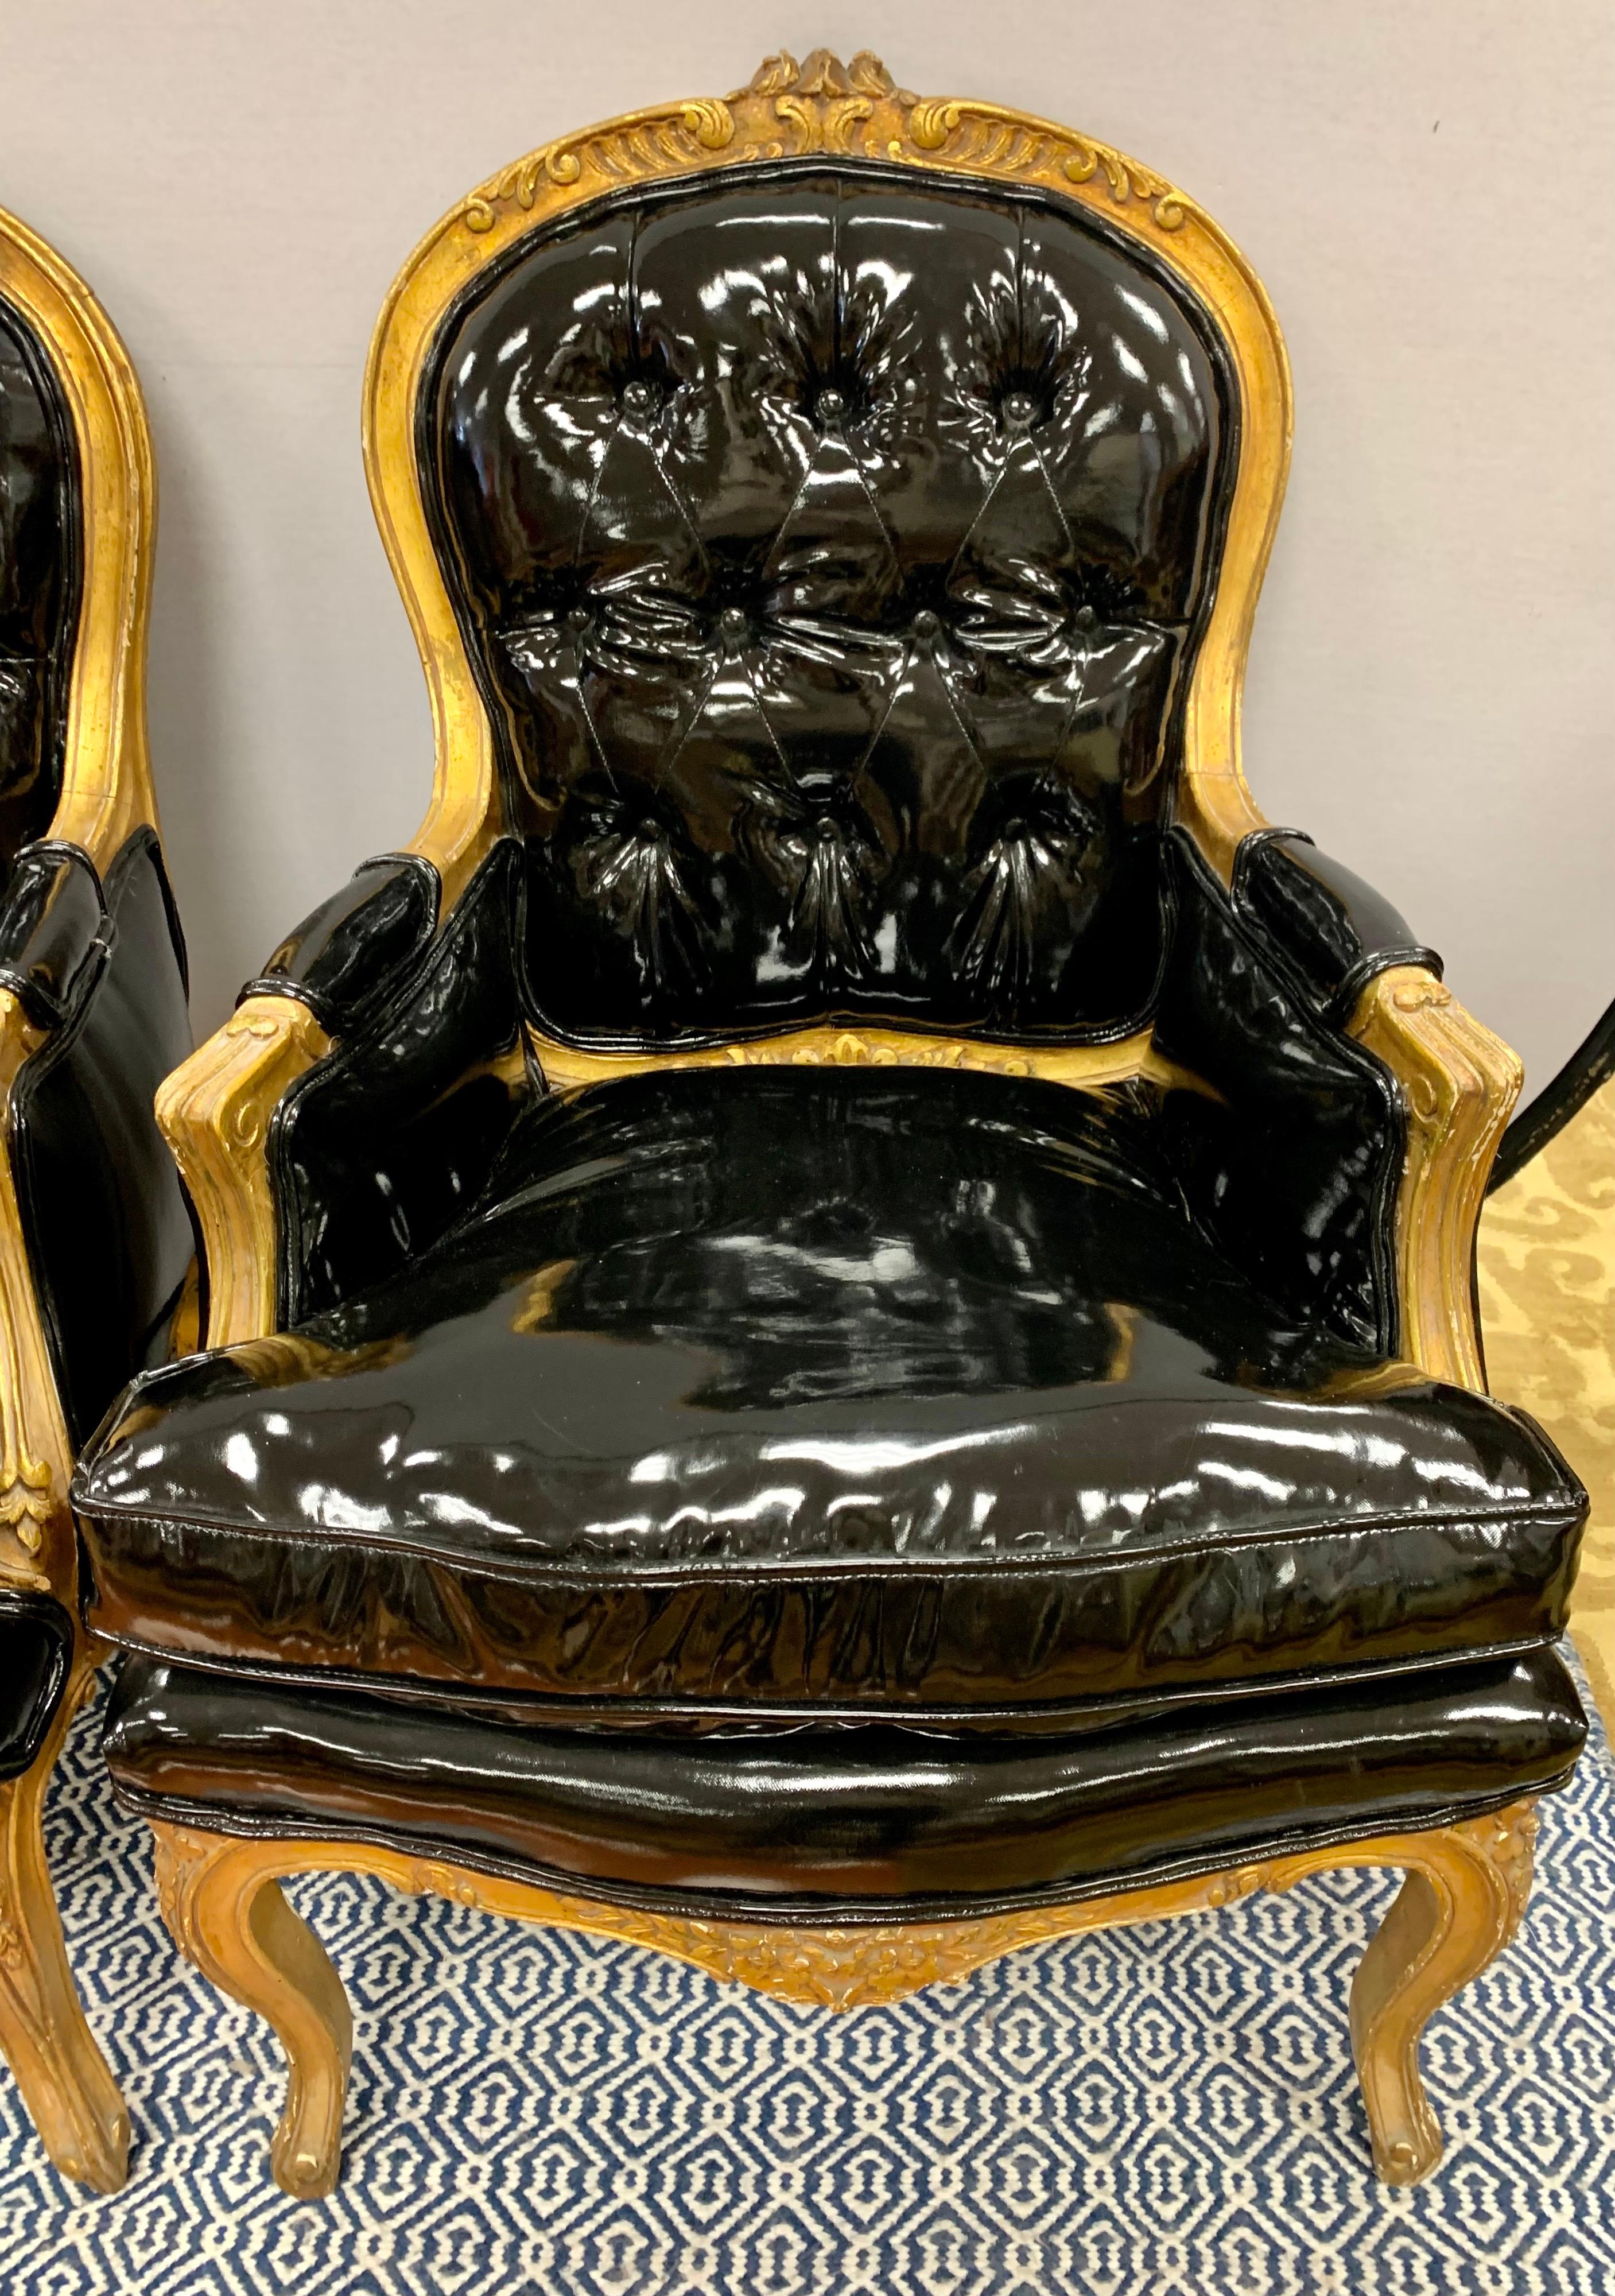 Pair of beautiful French bergeres with gilt frames and cabriole legs. Carved detail on the crest and legs. Tufted black faux patent leather upholstery.